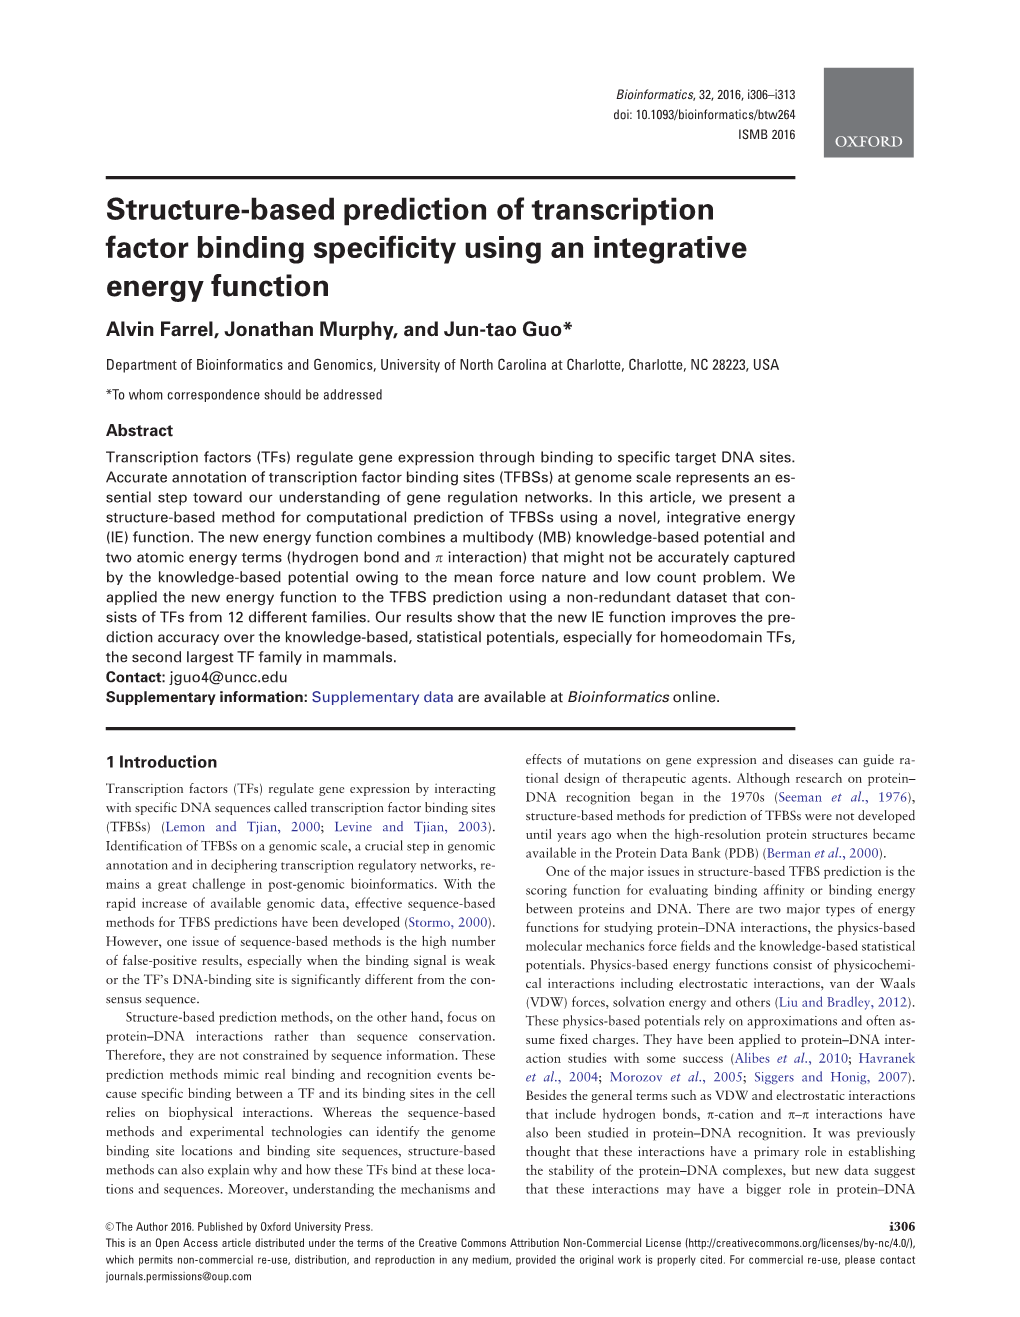 Structure-Based Prediction of Transcription Factor Binding Specificity Using an Integrative Energy Function Alvin Farrel, Jonathan Murphy, and Jun-Tao Guo*